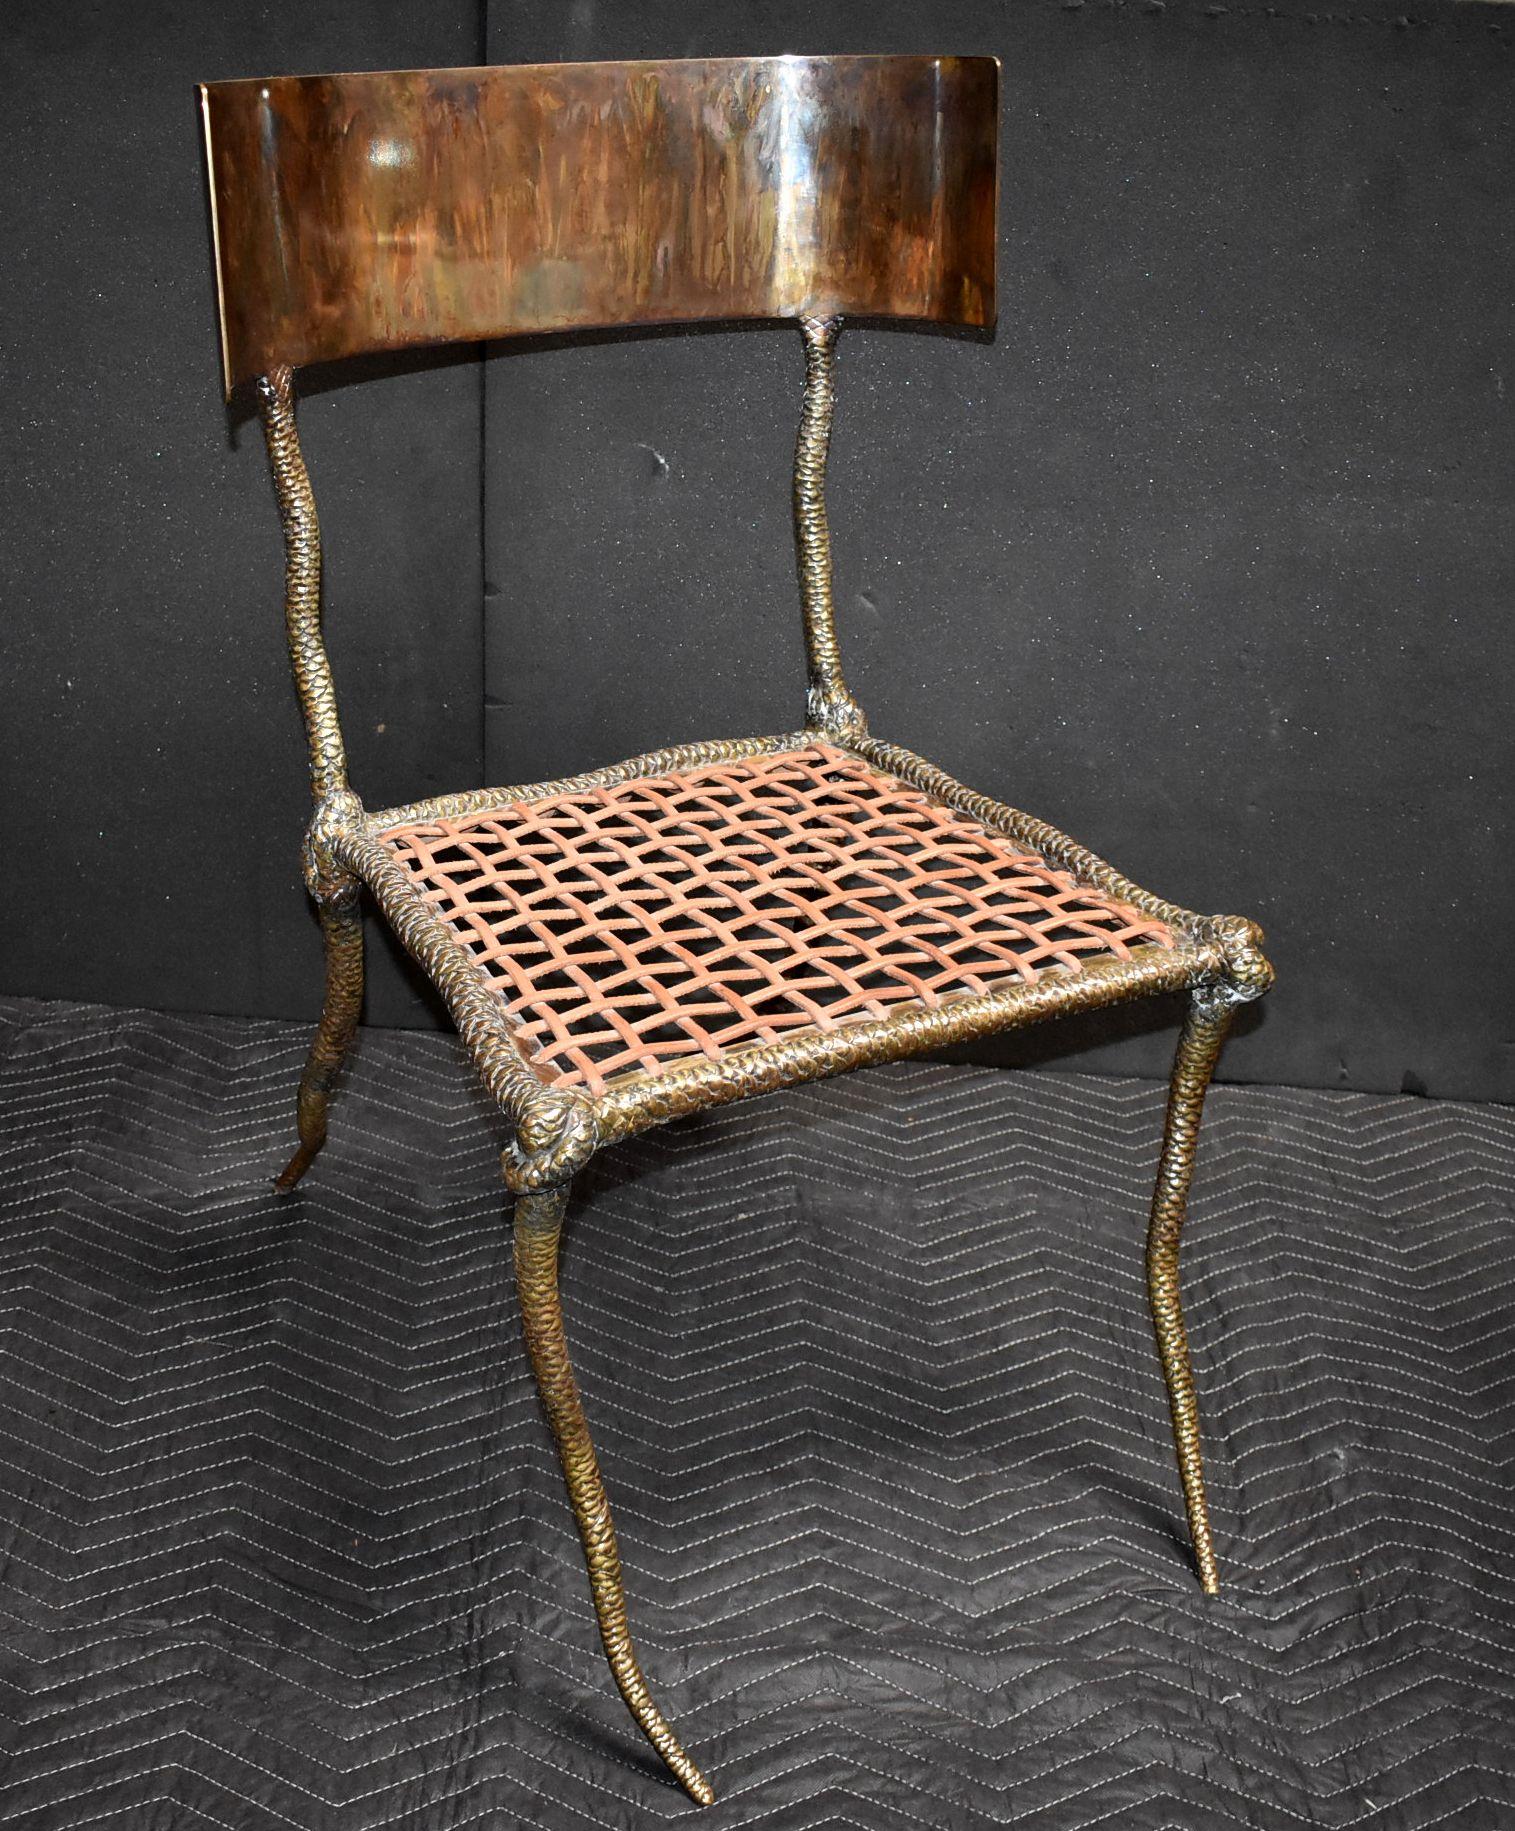 Solid brass sculptural side chair with leather strapping and curve back.(Brass tortoise finish on curve back and dark bronze patina finish on chair). 


Additional dimensions:
Width of curve back 21.50 inches
Width front seat 21 inches
Width